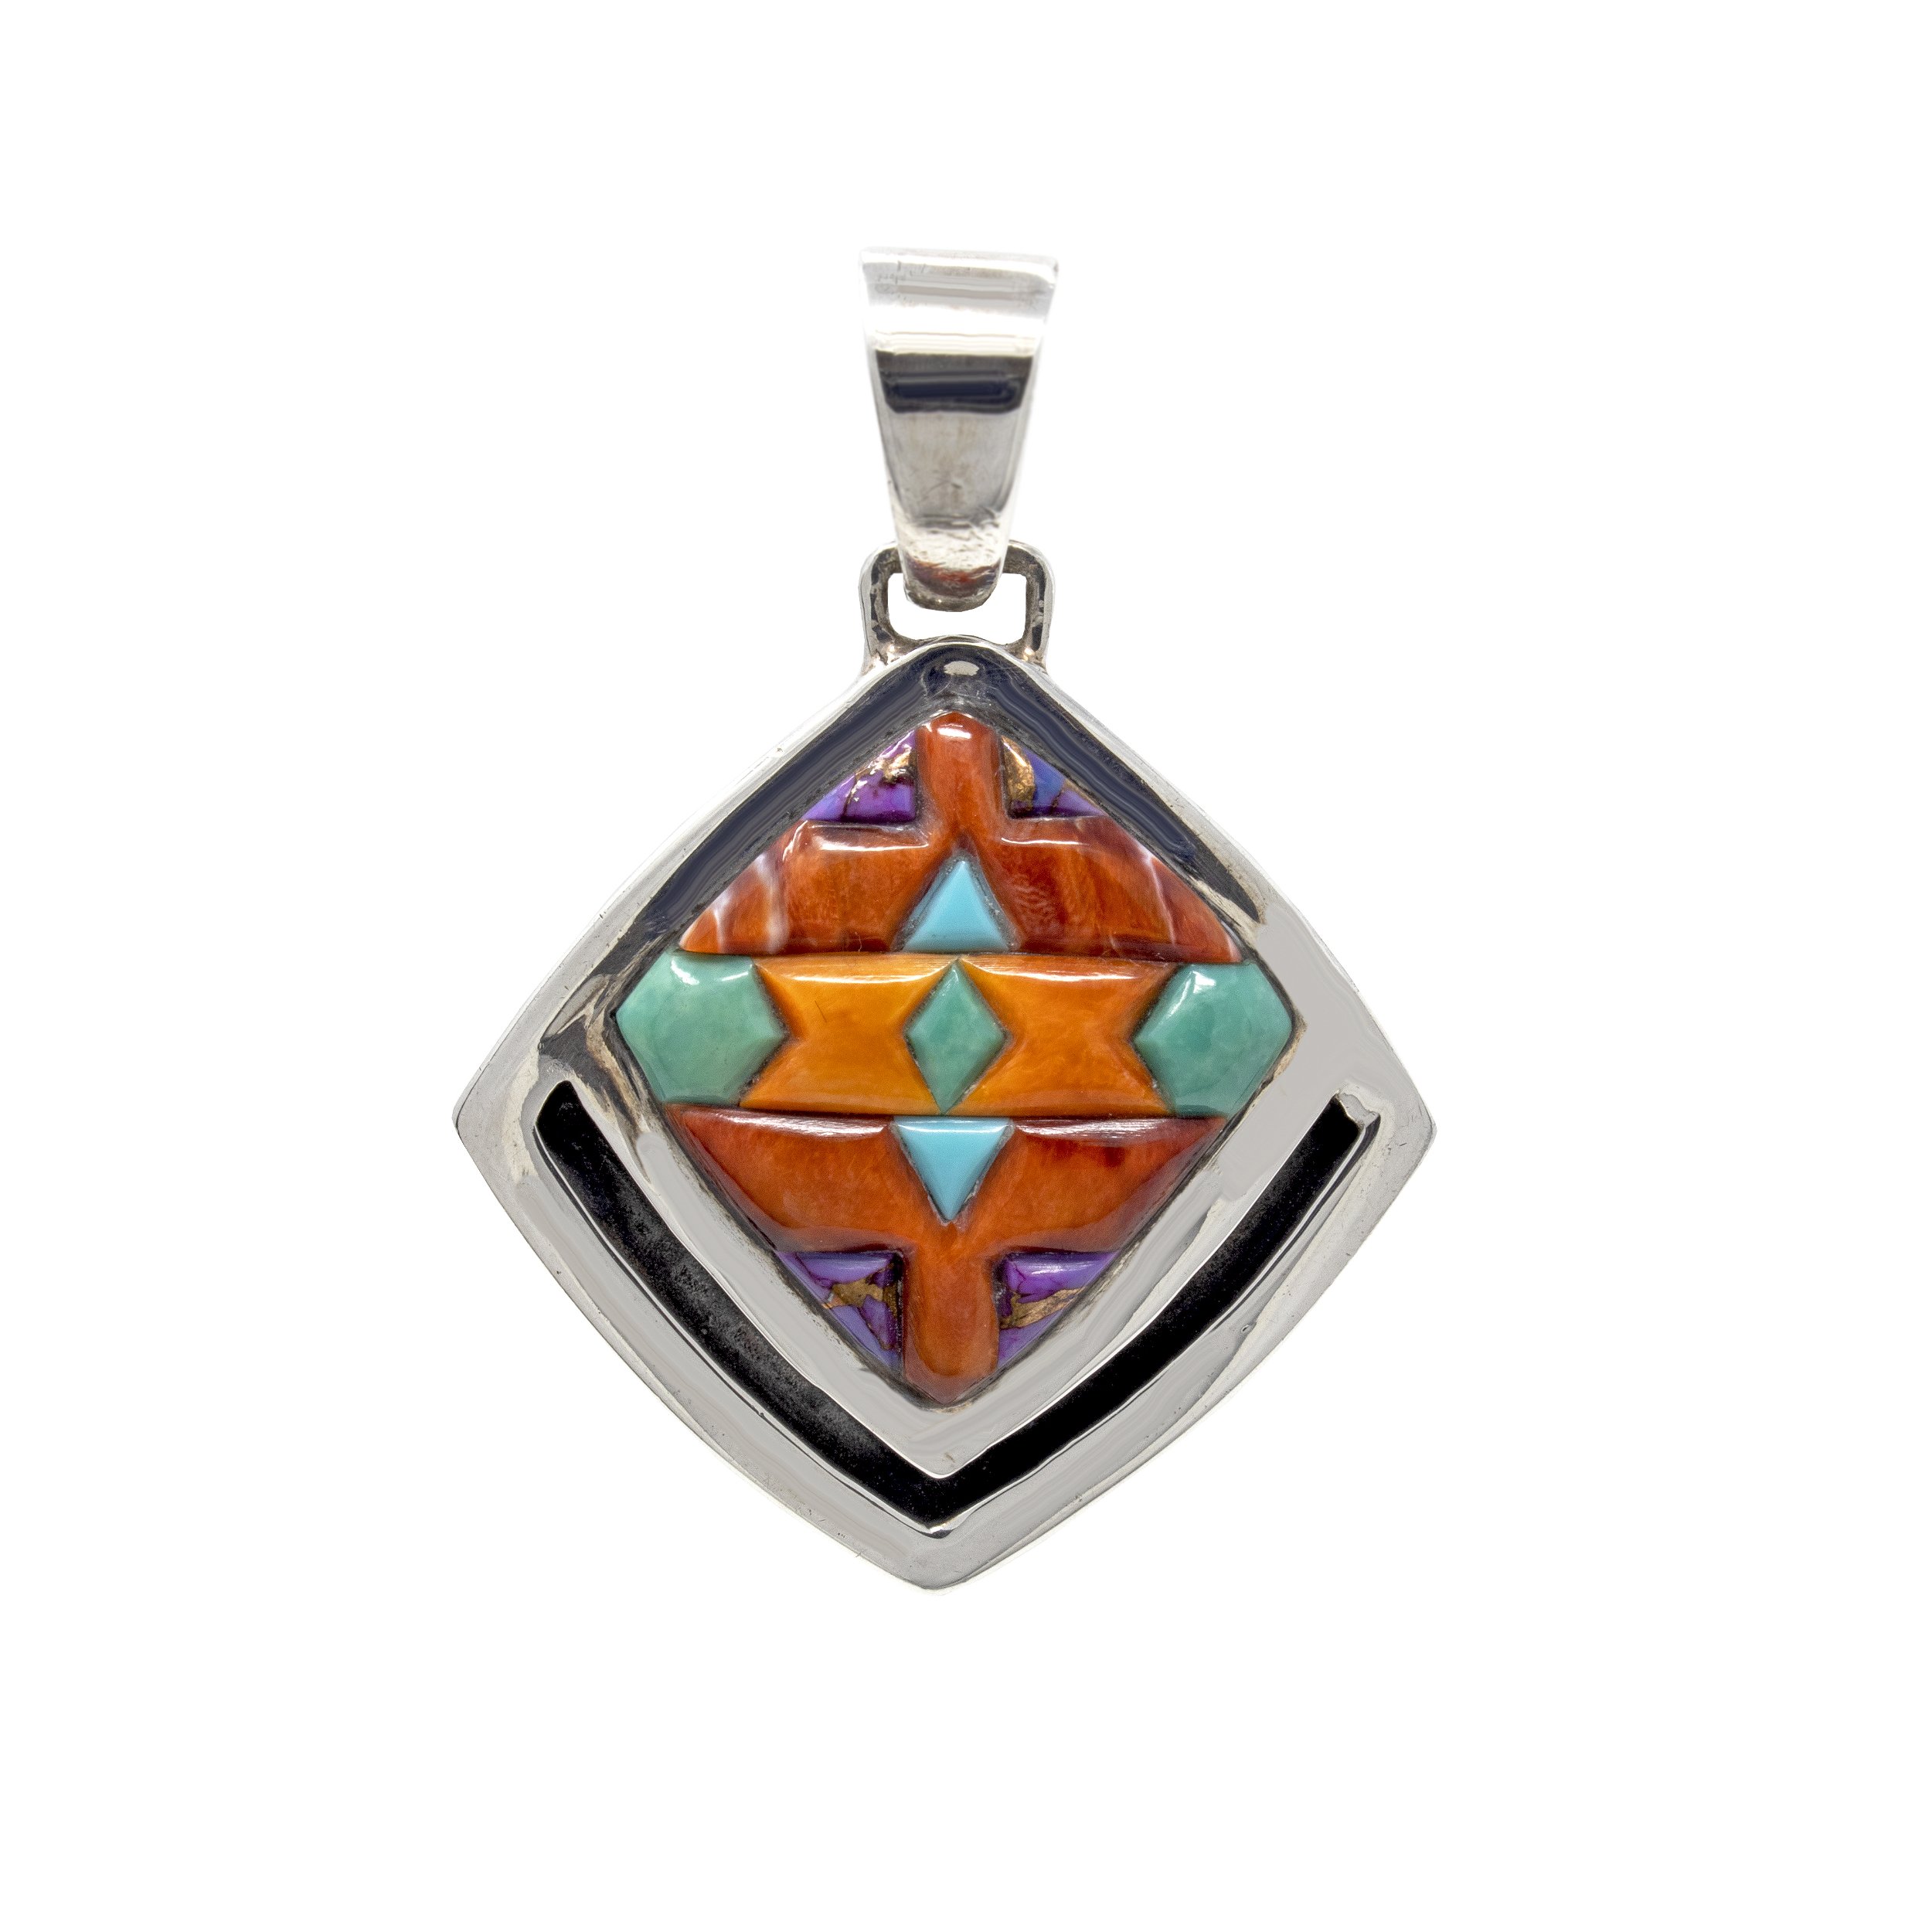 Popcorn Inlay Pendant - Diamond Set Square In Silver Bezel With V Shaped Cutout